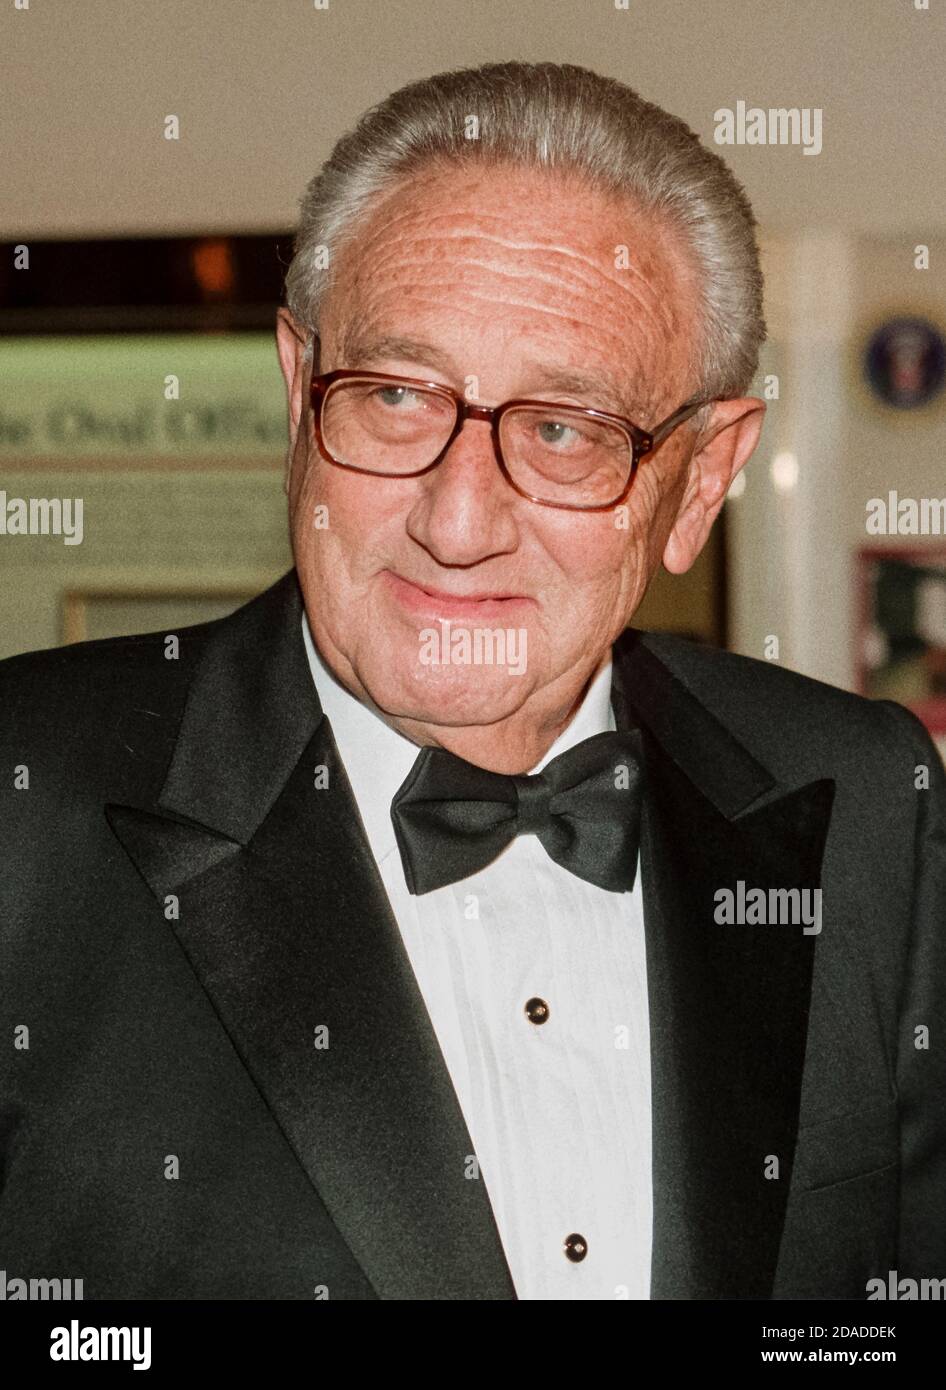 Former United States Secretary of State Henry A. Kissinger arrives at The White House in Washington, D.C. on October 29, 1997 for a State Dinner for President Jiang Zemin of China.Credit: Ron Sachs / CNP / MediaPunch Stock Photo